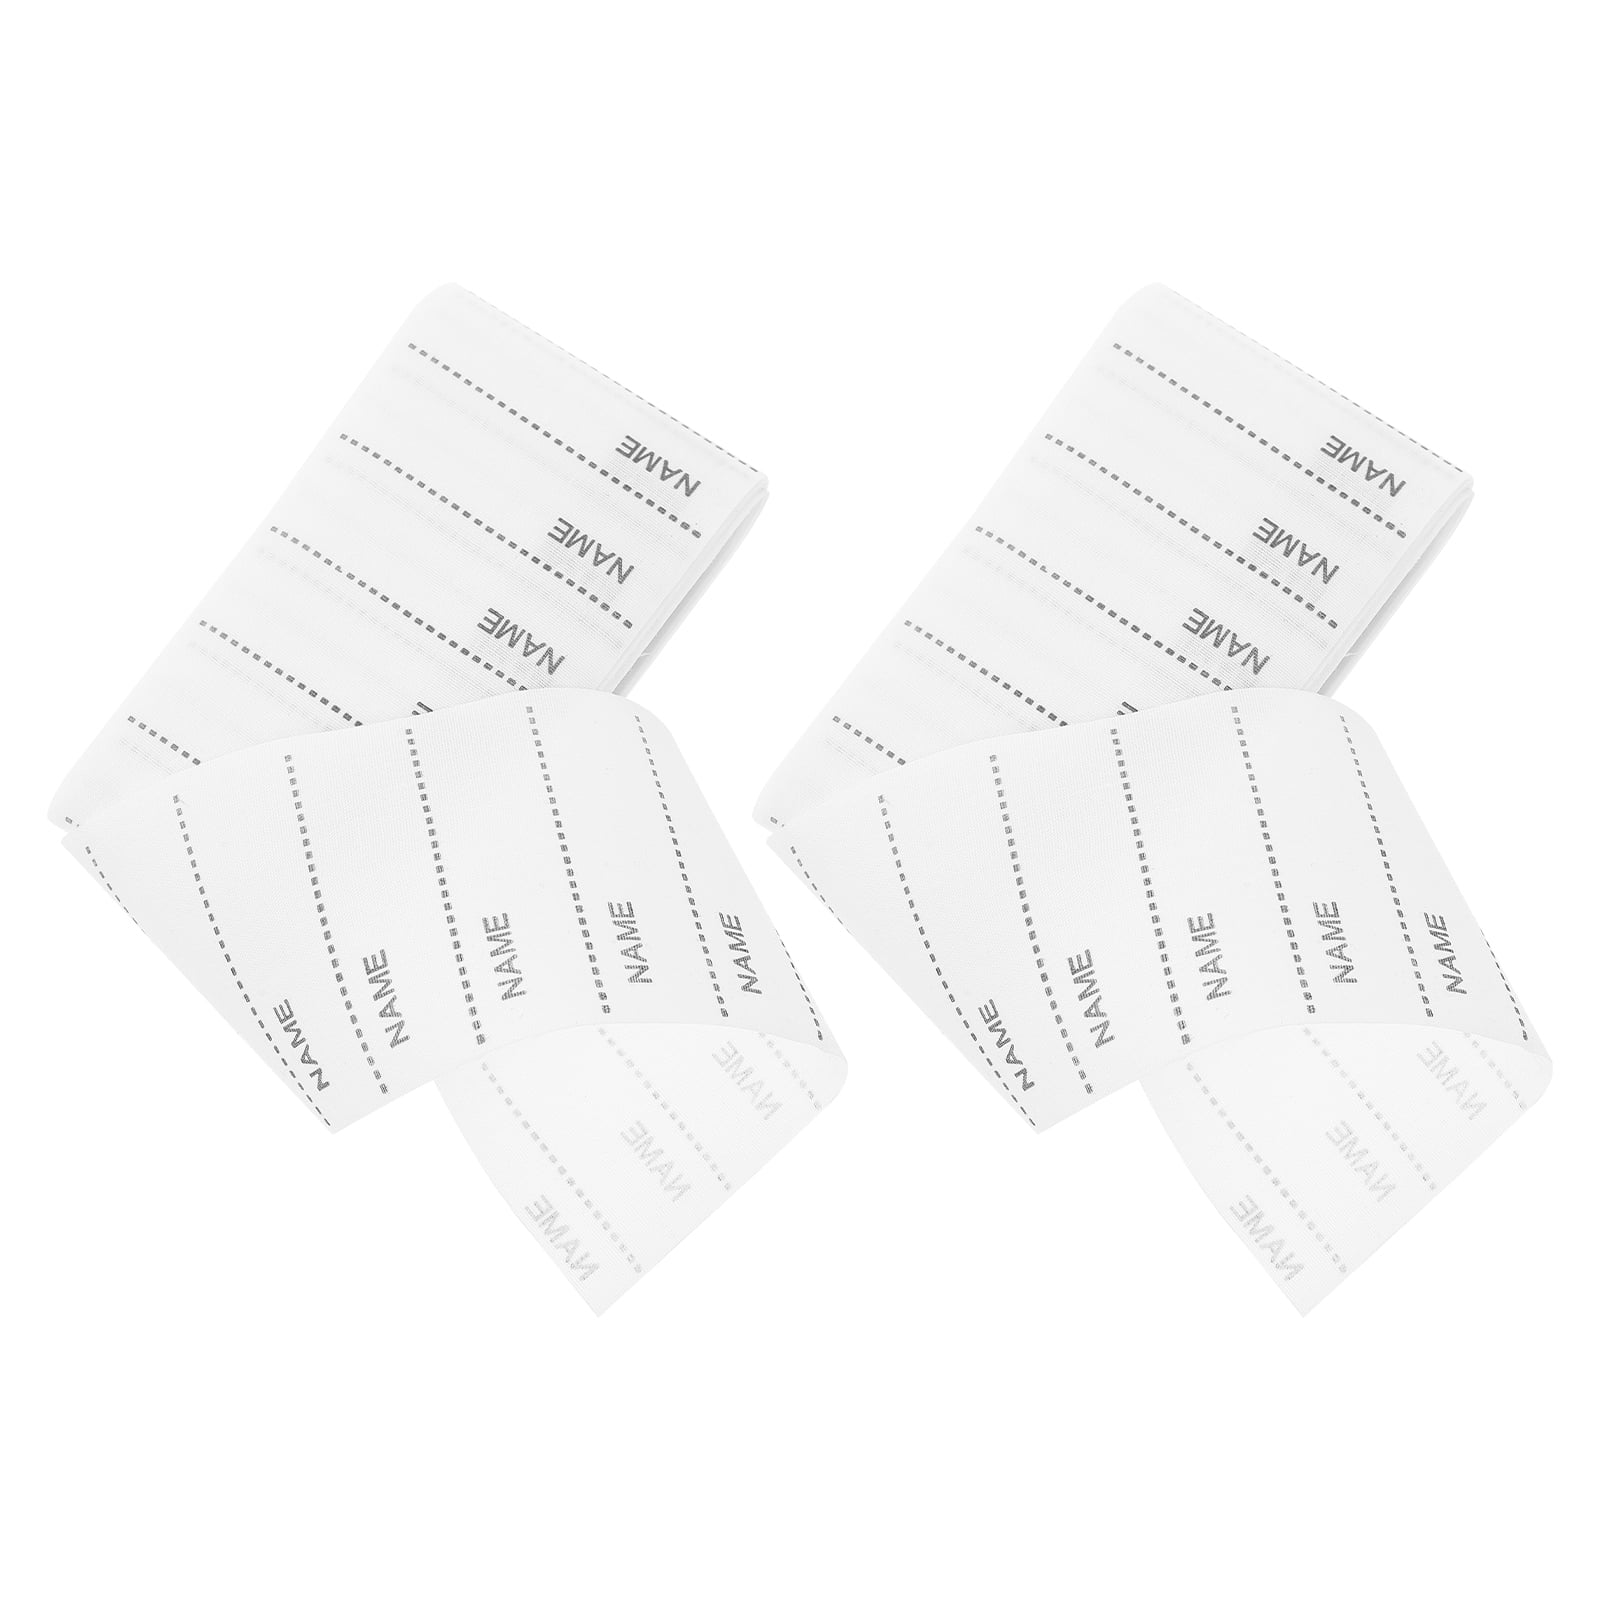 HOMEMAXS 2 Sets of Washable Iron on Name Labels Garment Fabric Tags ...